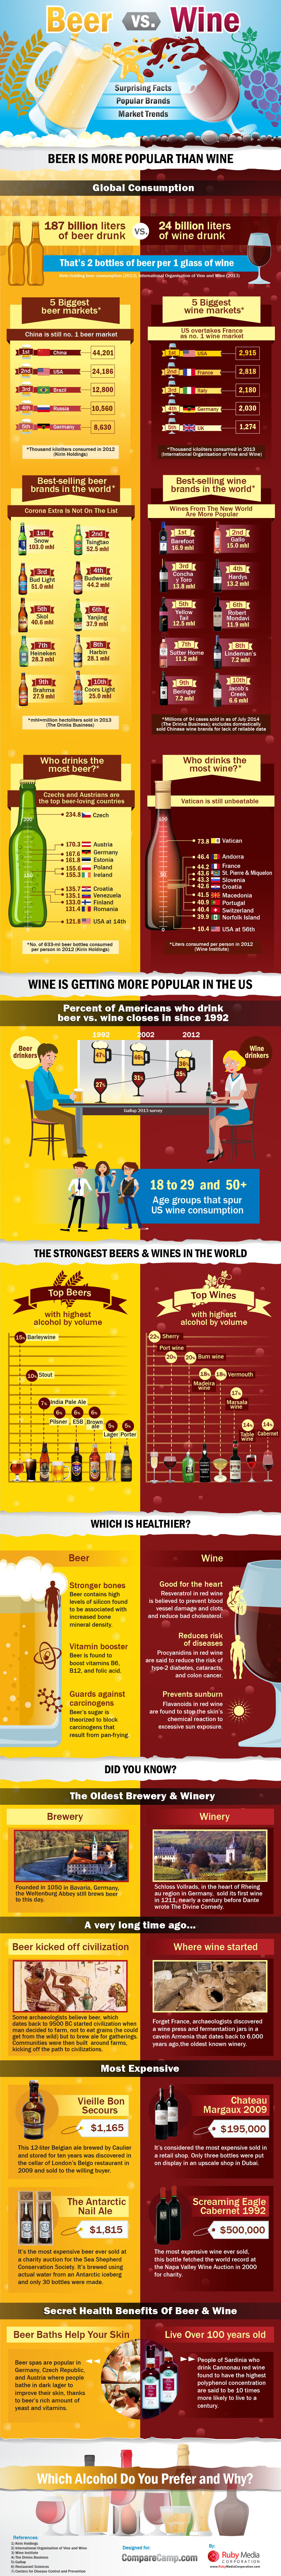 Comparison Of Wine And Beer: Industry Statistics, Fun Facts & The Most Popular Brands